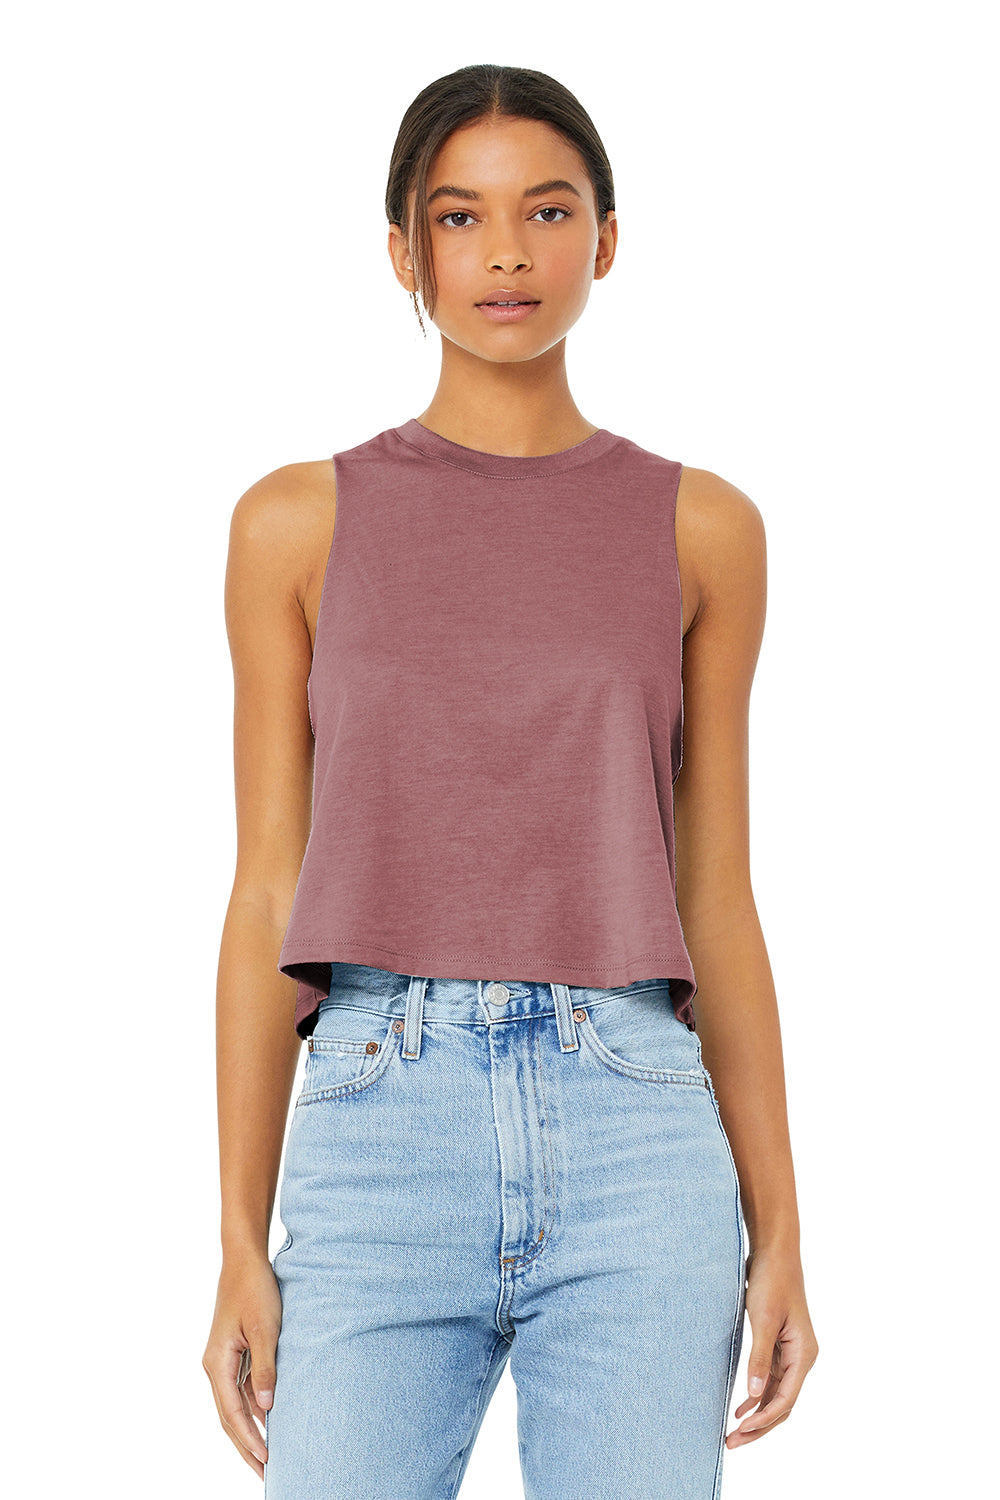 Bella + Canvas BC6682/6682 Womens Cropped Tank Top Heather Mauve Model Front